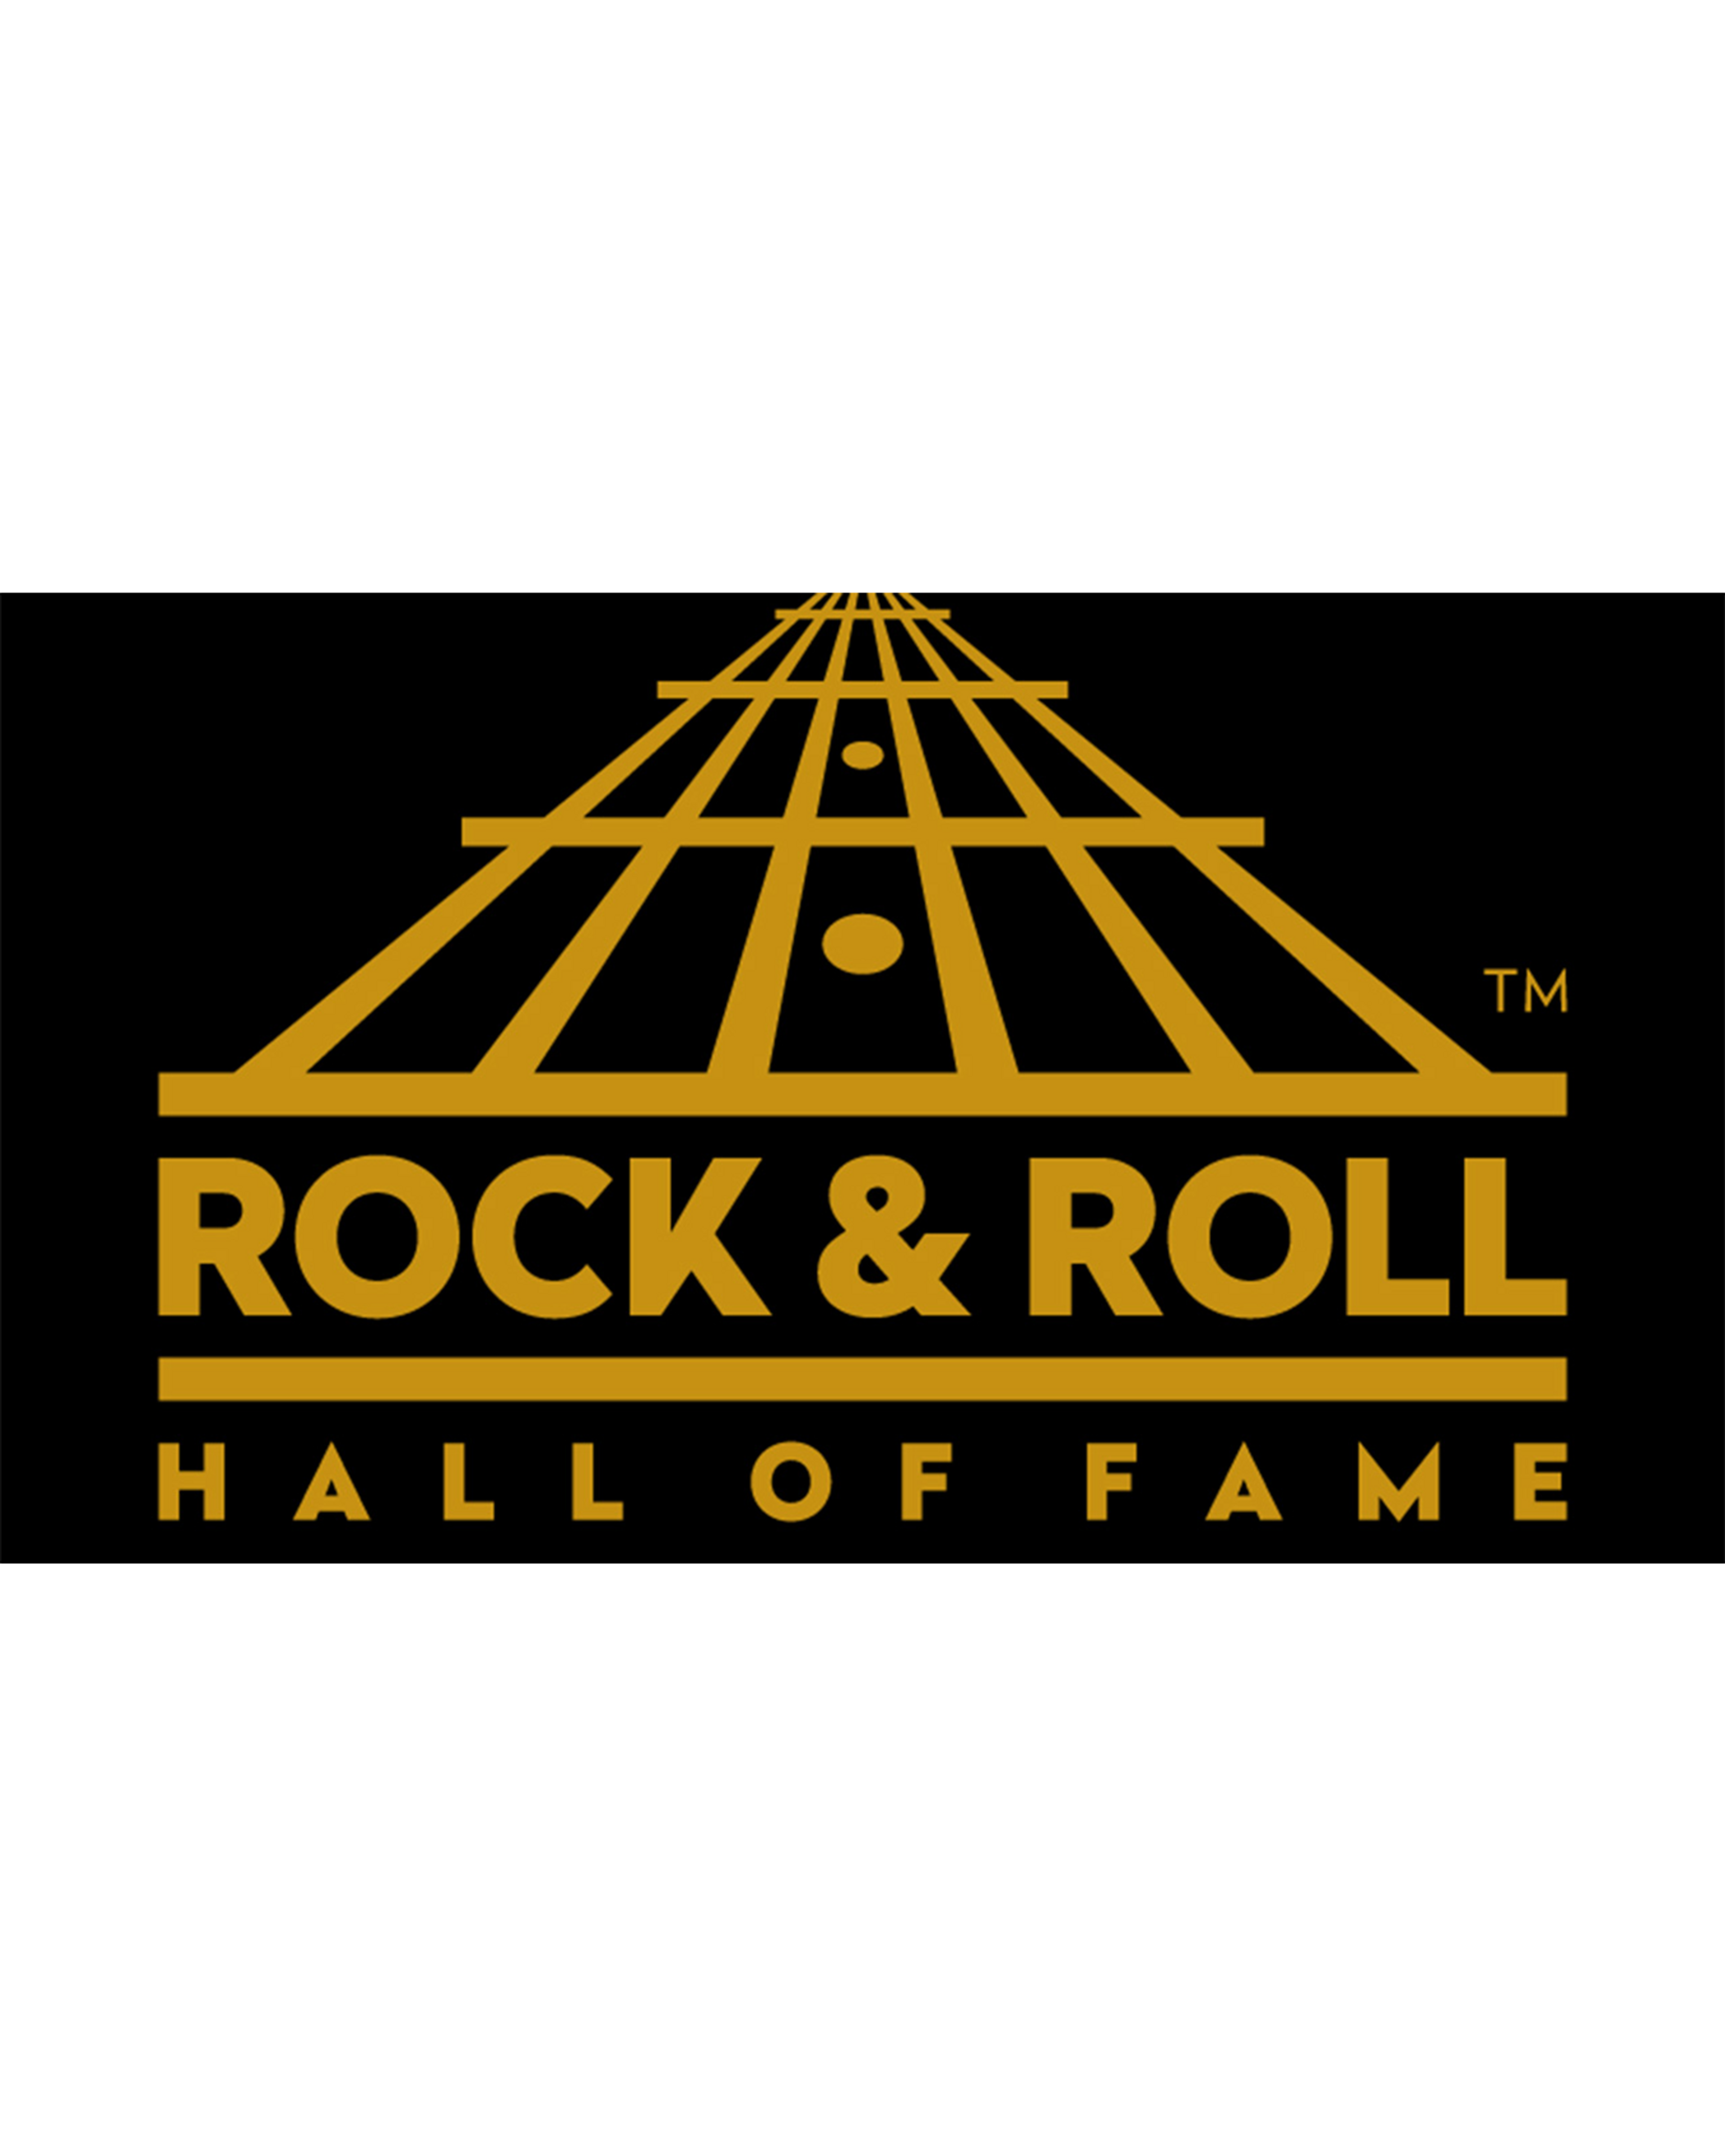 Black and gold Rock & Roll Hall Of Fame logo